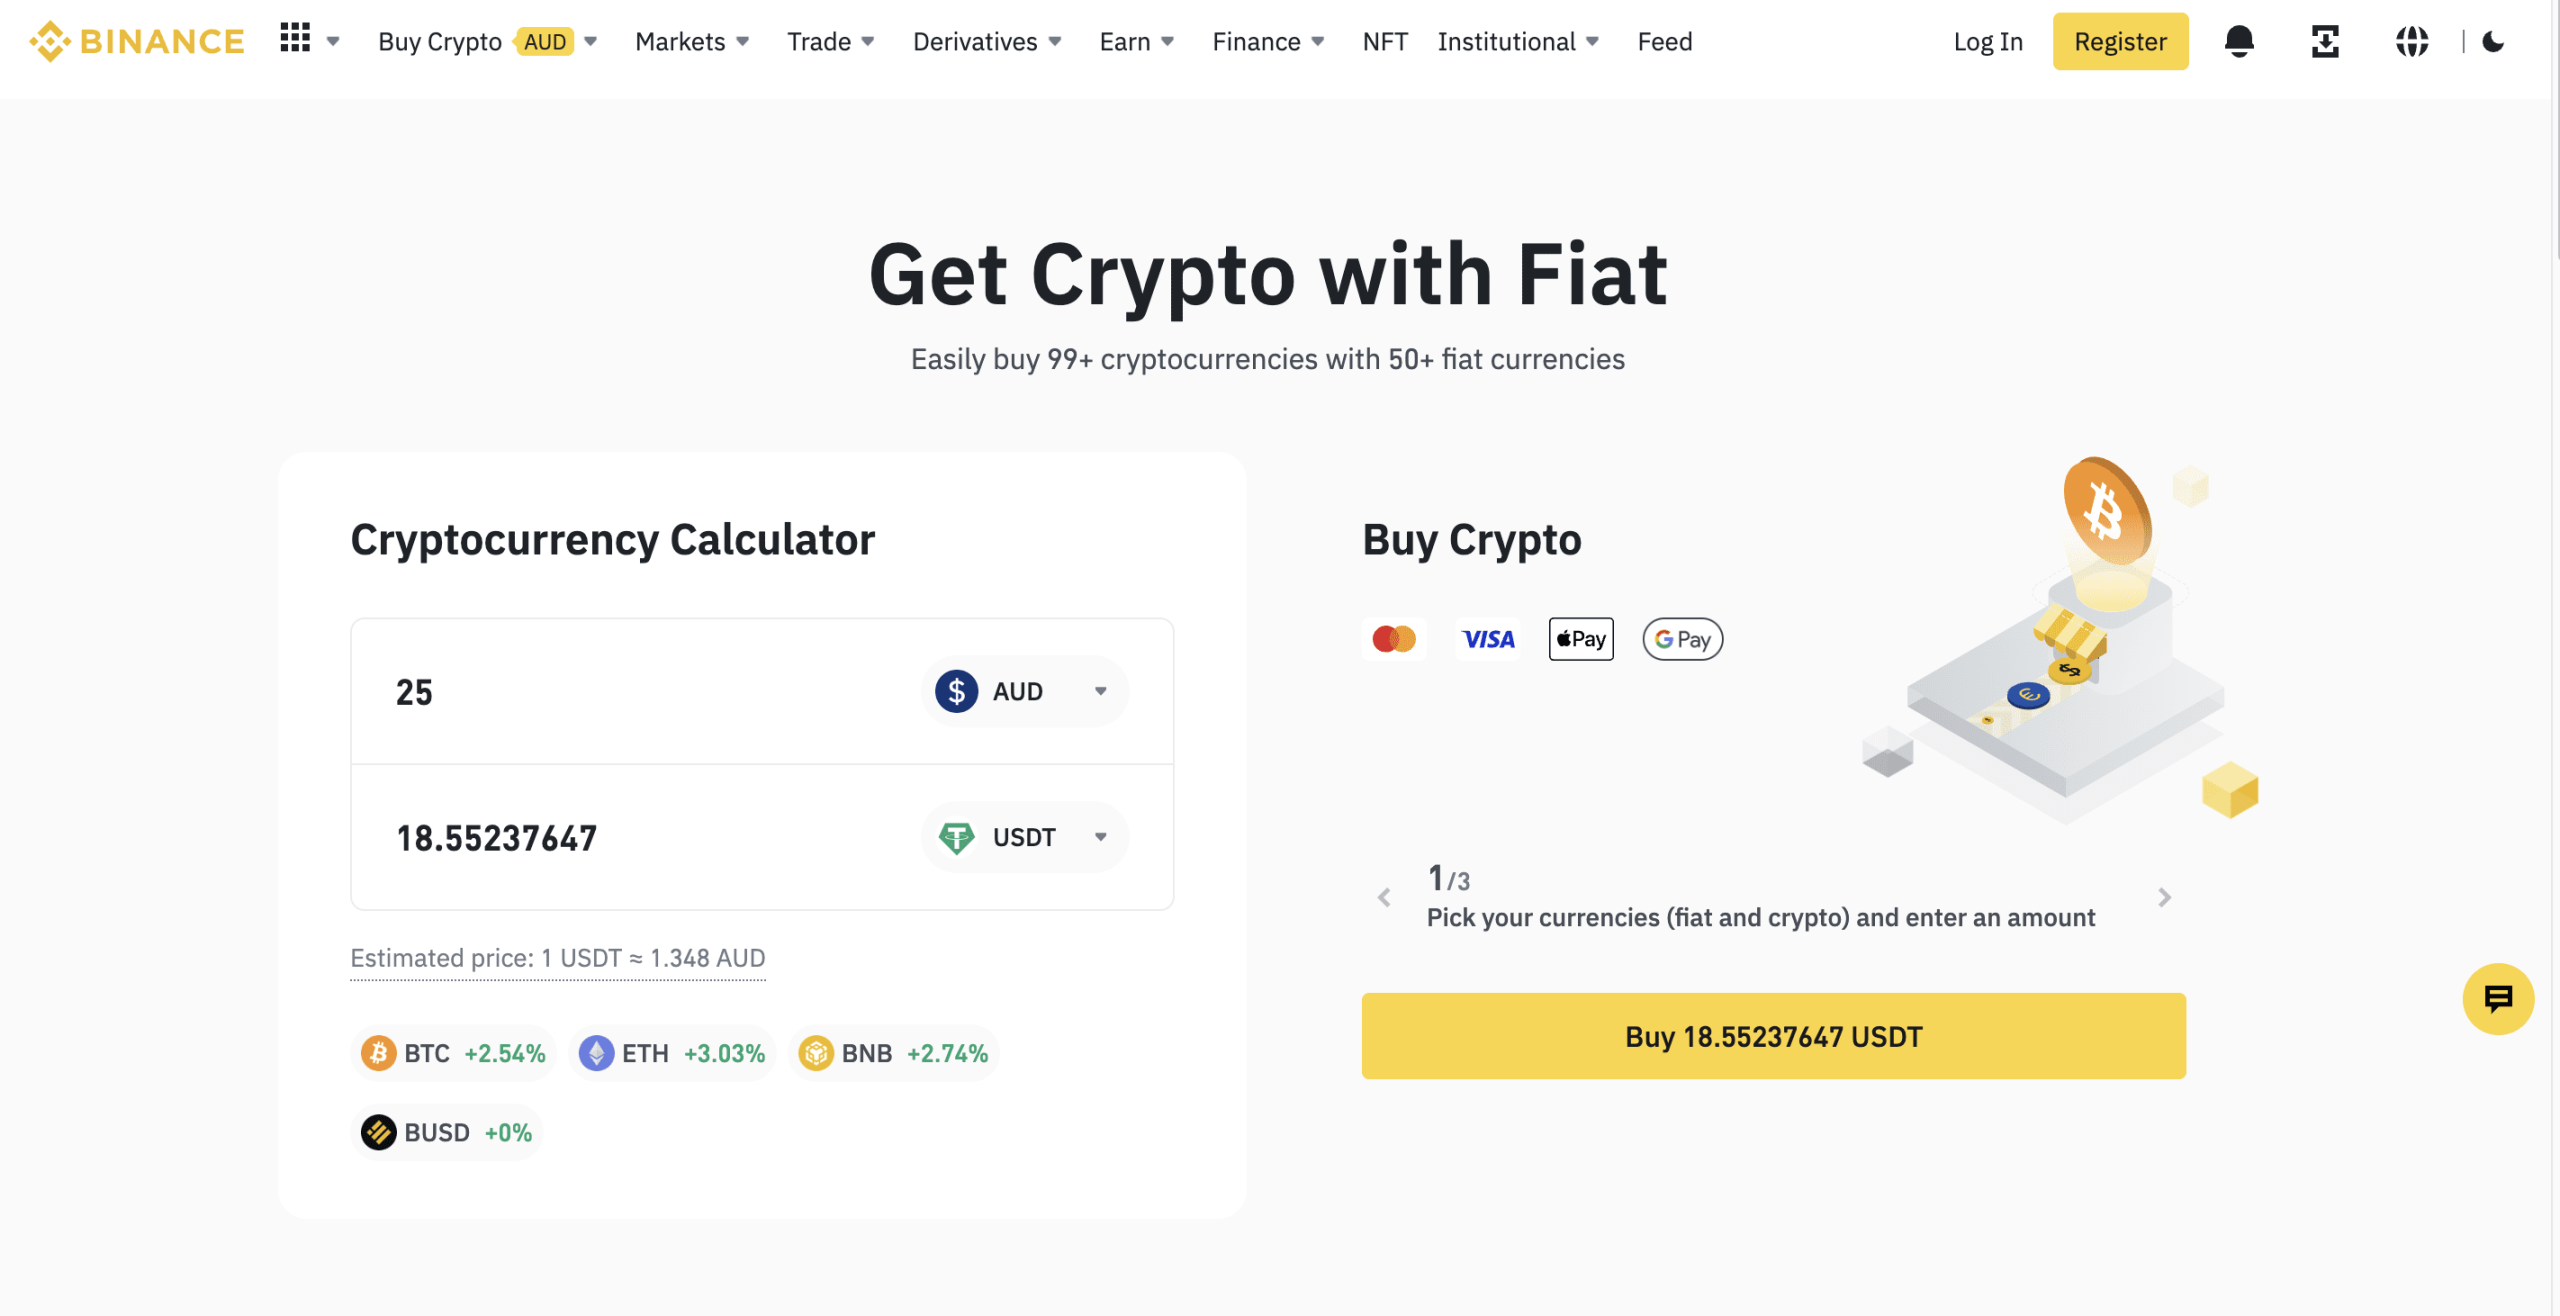 Buy crypto with fiat page on Binance